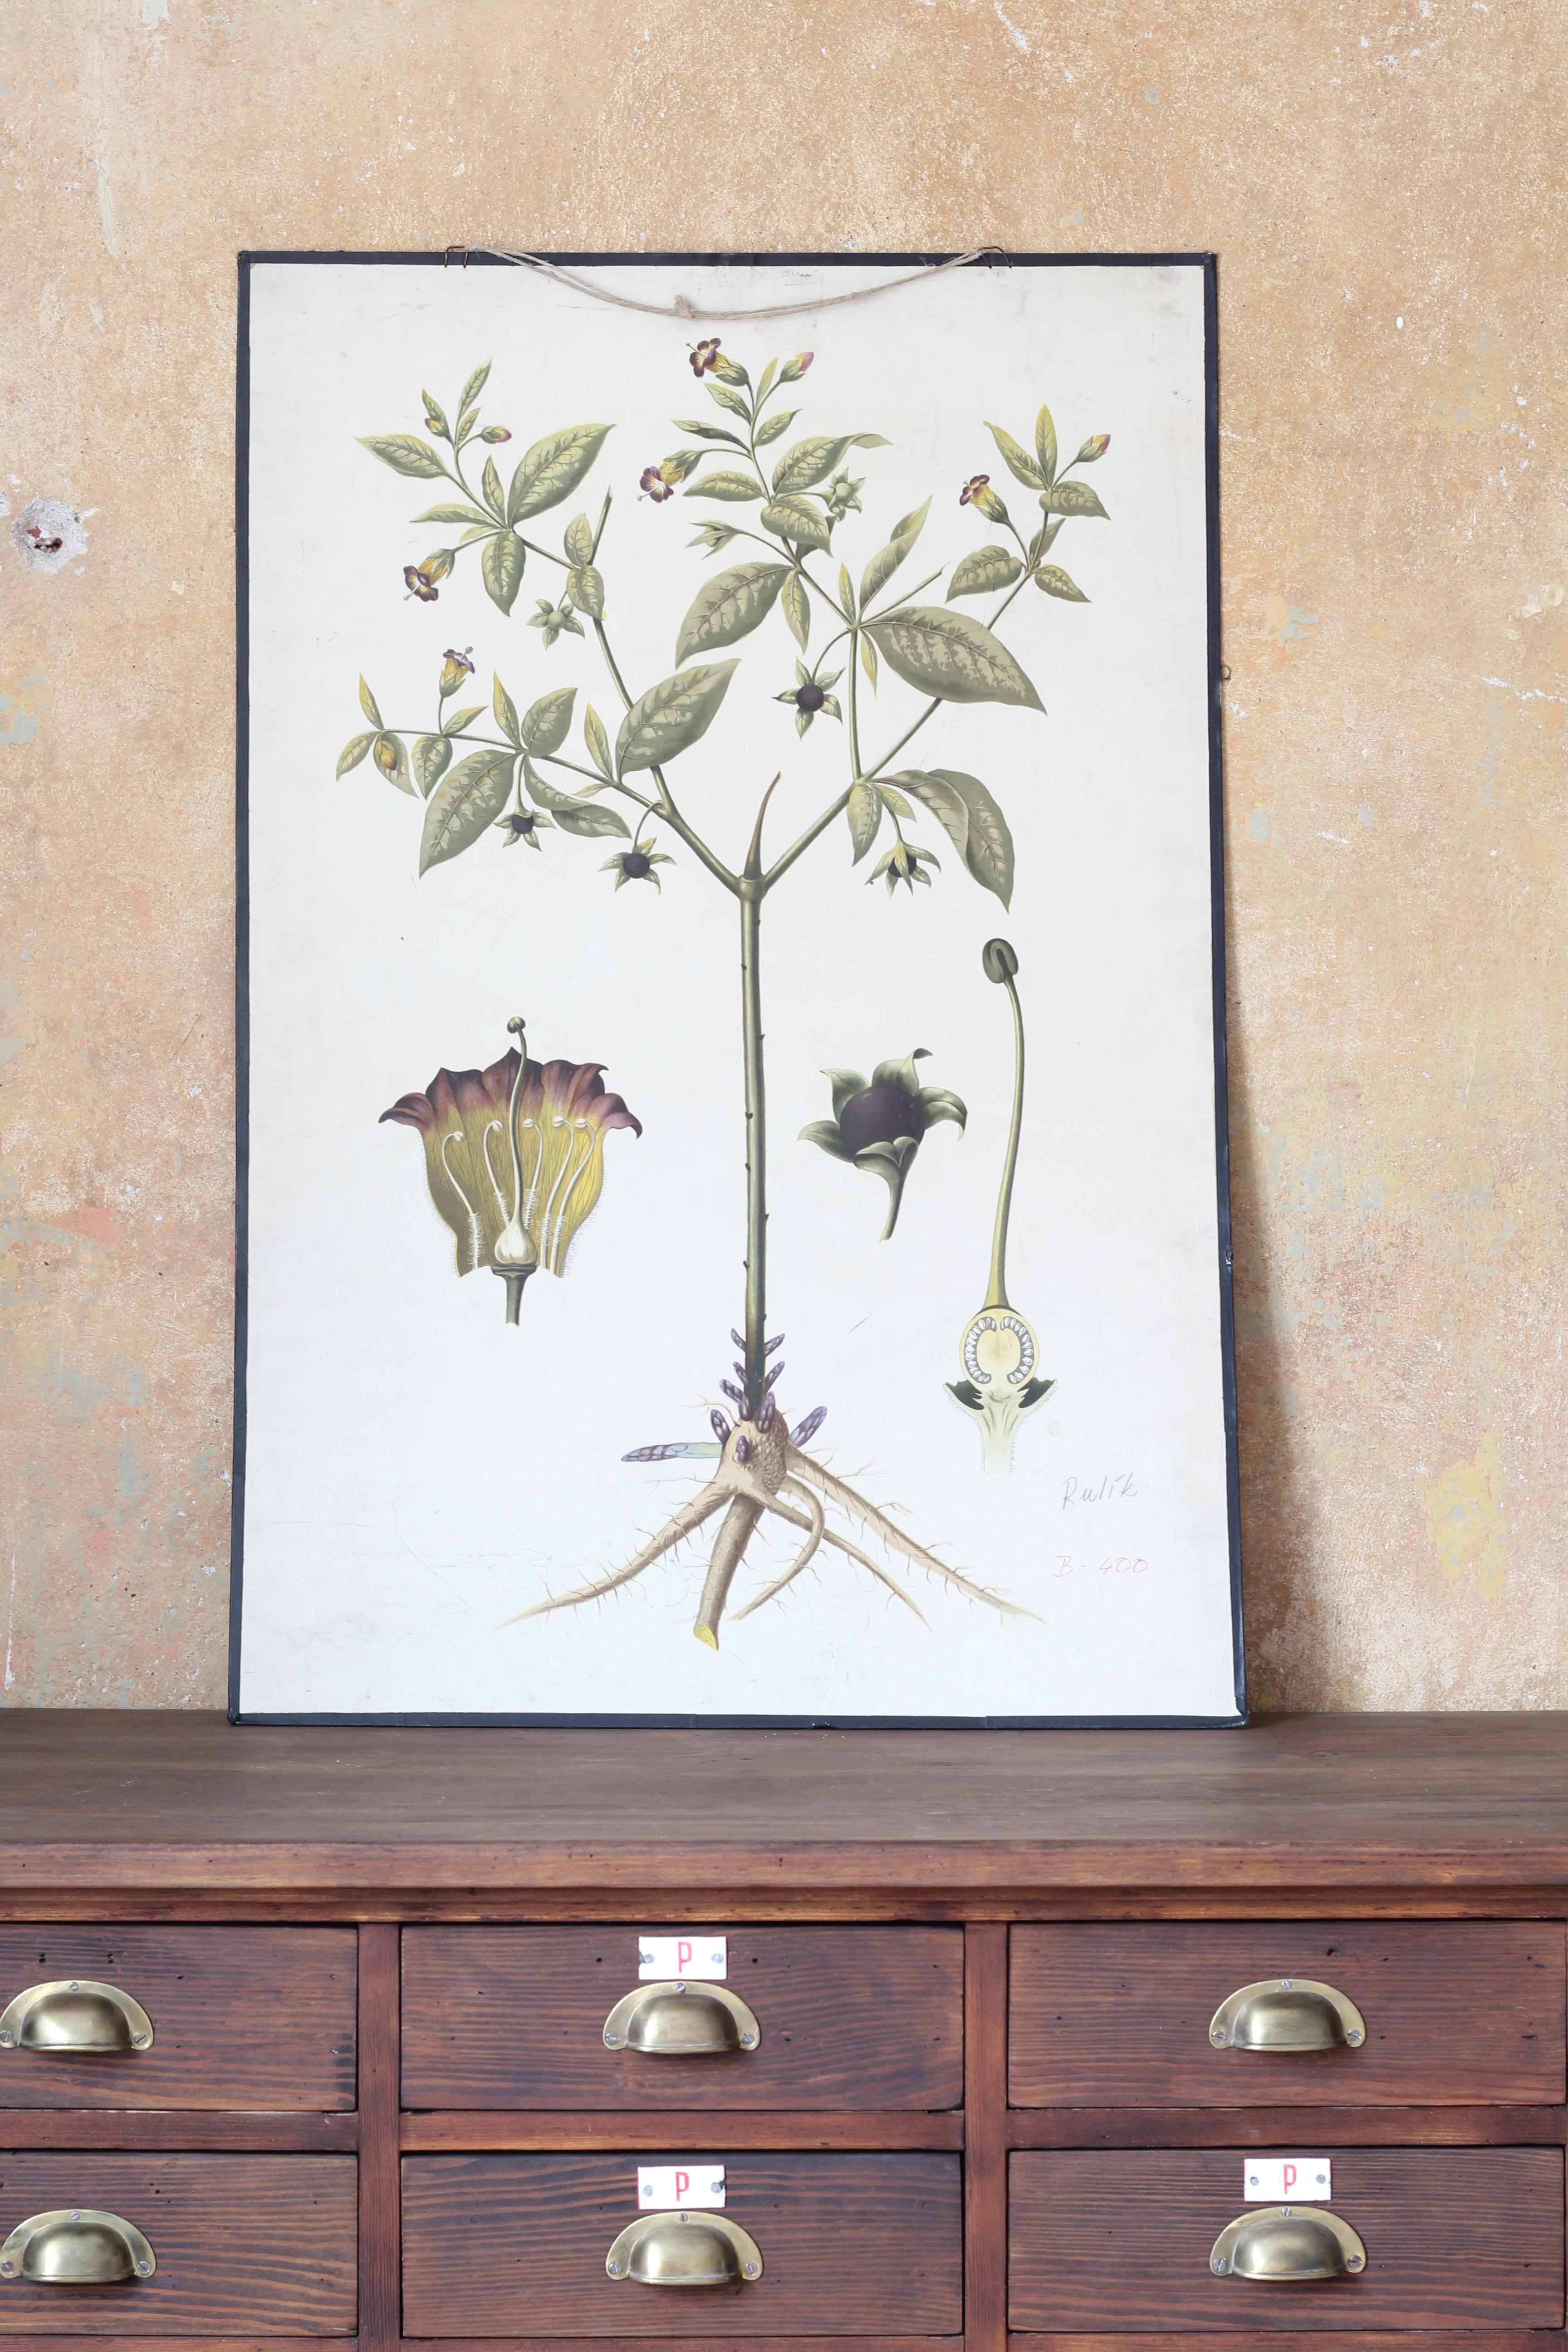 Old school chart with a beautiful detailed floral drawing. The chart is full of colors and presents precise images of this plant. It is made of a rigid cardboard. Perfect decor piece for a restaurant or stylish kitchen.